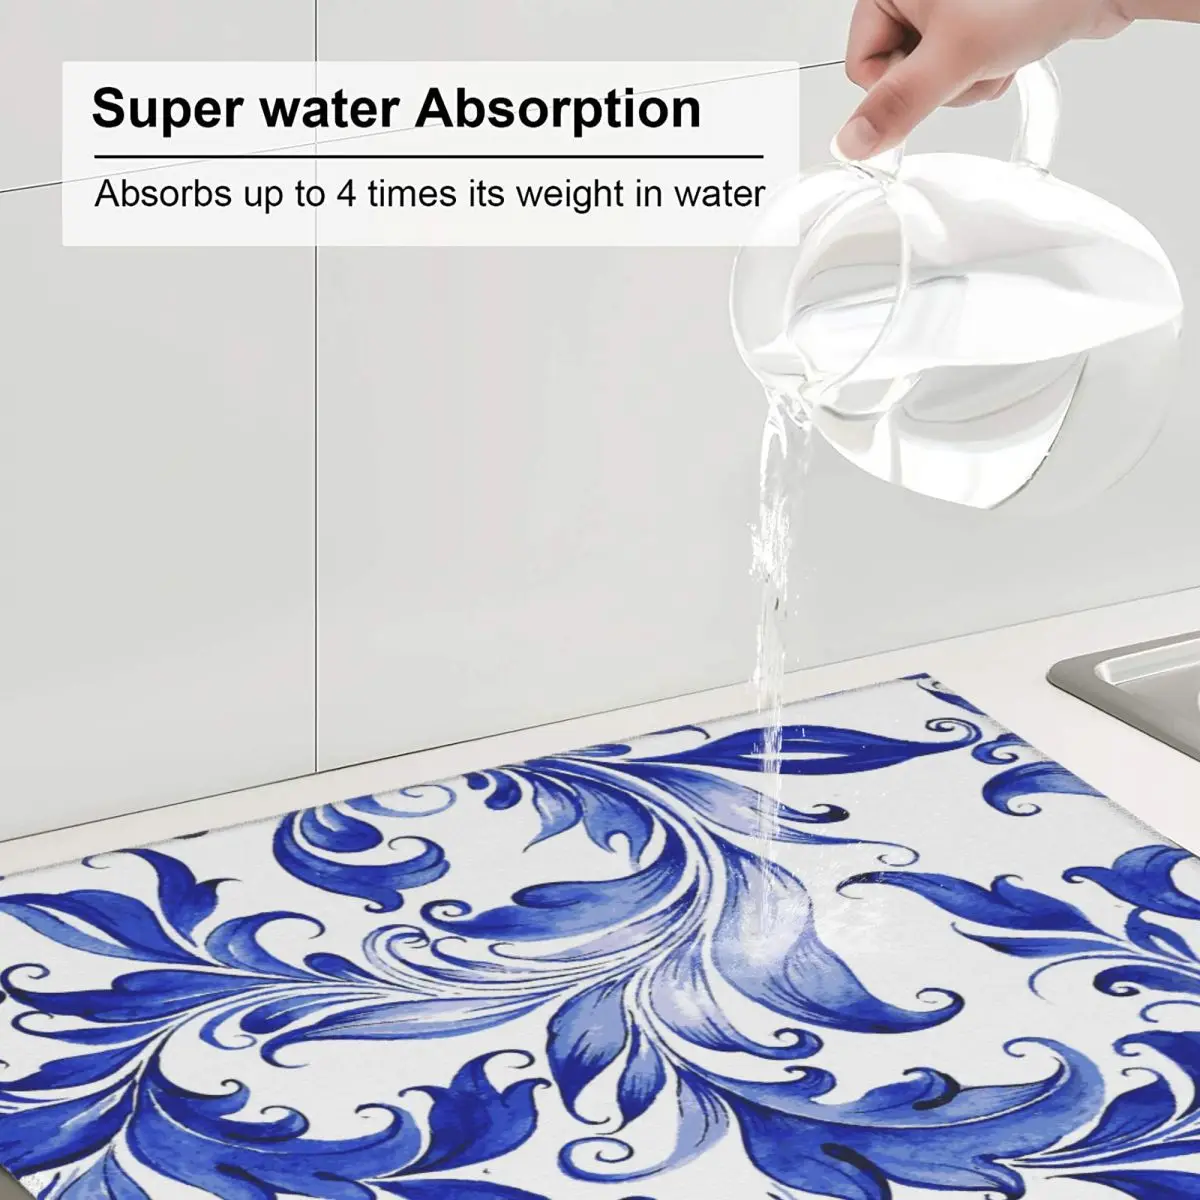 https://ae01.alicdn.com/kf/Sc437239c9e3141939037199f5dc5f4d4n/Kitchen-Dish-Drying-Mat-Blue-And-White-Floral-Pattern-Washable-Counter-Pad-Absorbent-Drainer-16-x18.jpg